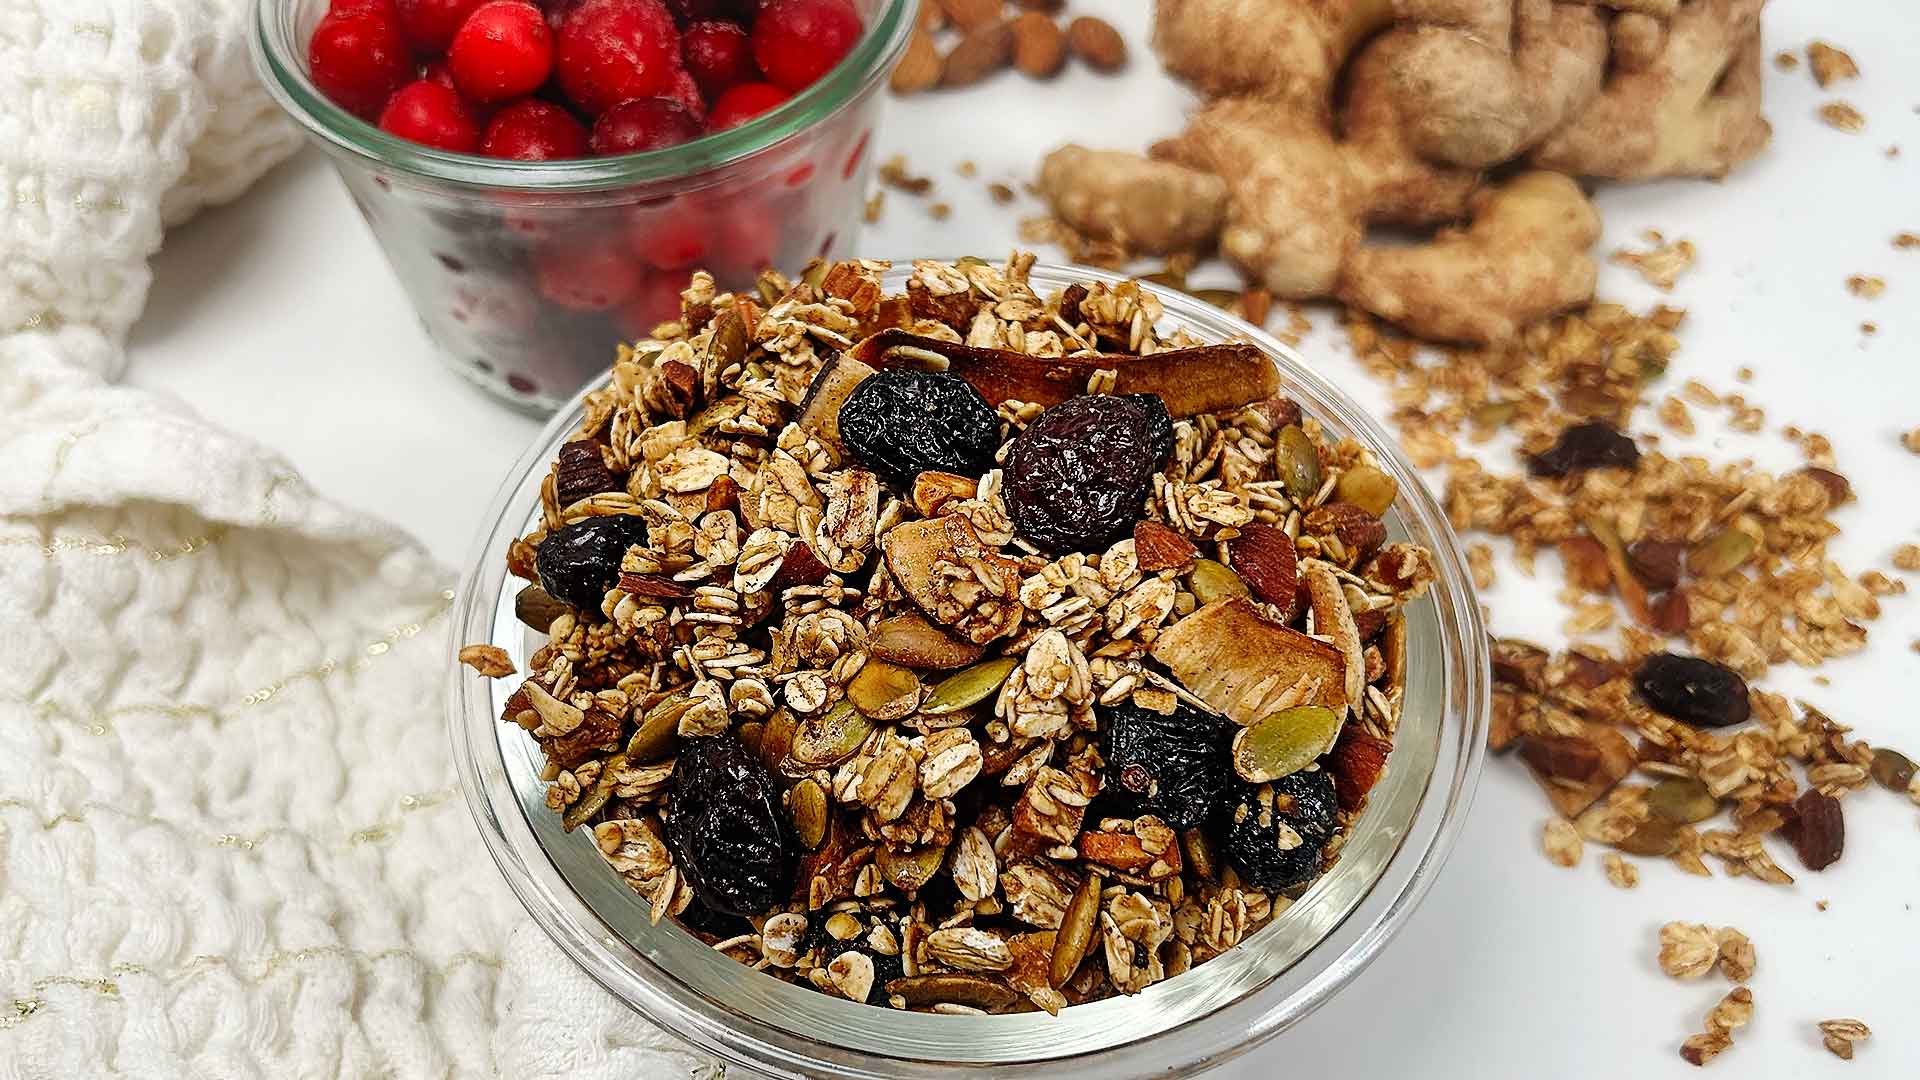 Discover the art of crafting delectable homemade granola with our step-by-step guide. From choosing wholesome ingredients to achieving the perfect crunch, our blog has all the tips and tricks you need. Say goodbye to store-bought granola and hello to a healthier, tastier breakfast option. Try it now! #homemade, #granola, #granolarecipe, #classicgranola, #cooking, #savemoneyongroceries, #healthyrecipes